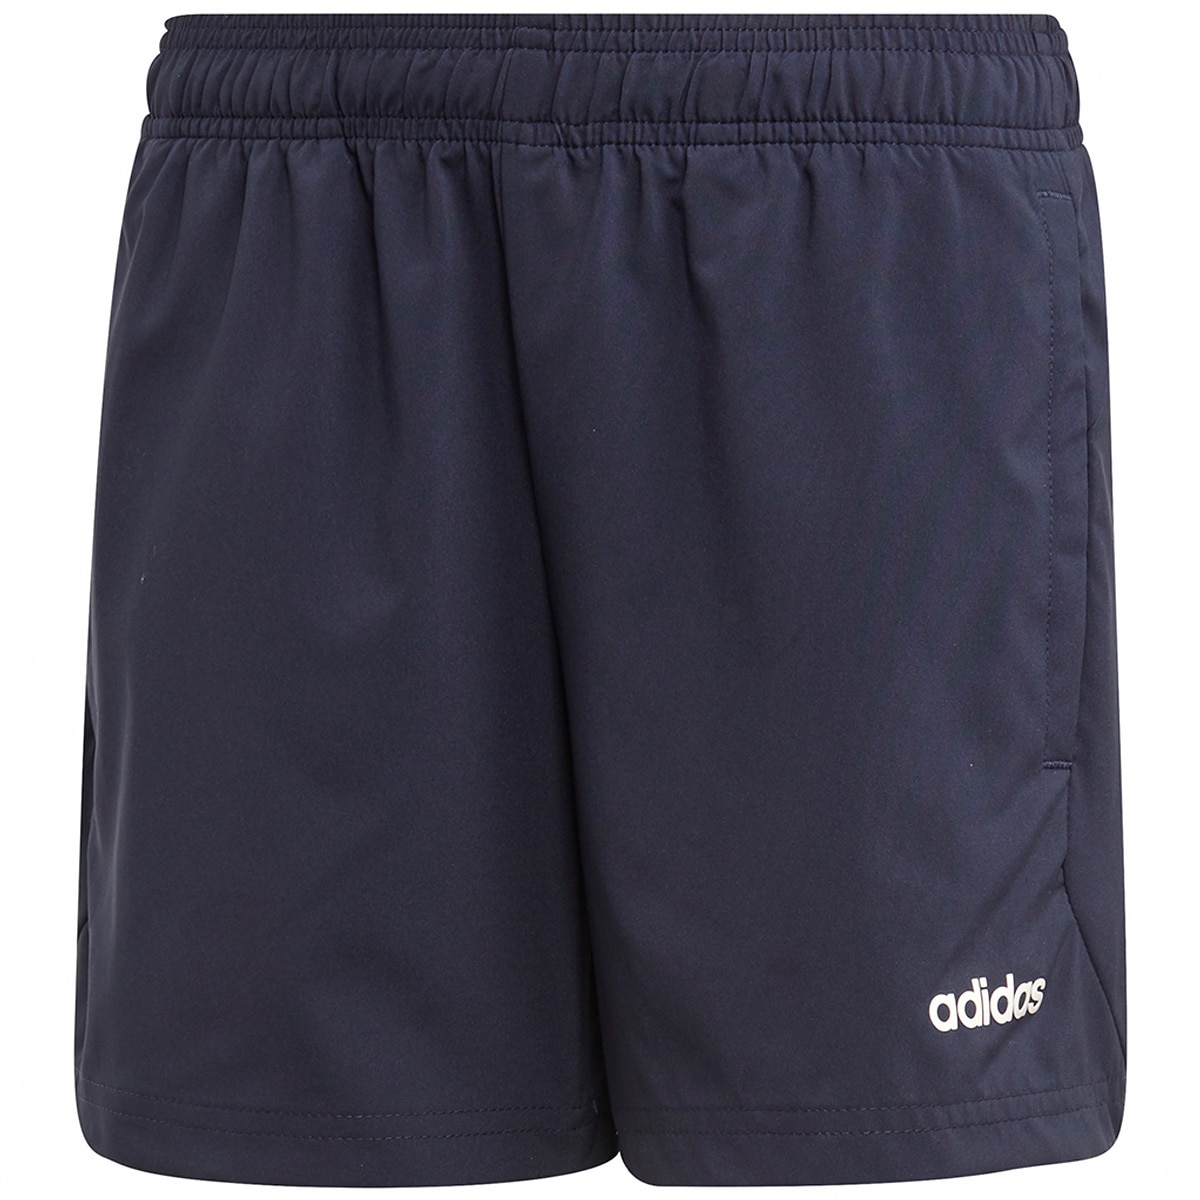 Adidas Youth shorts - Legends Ink